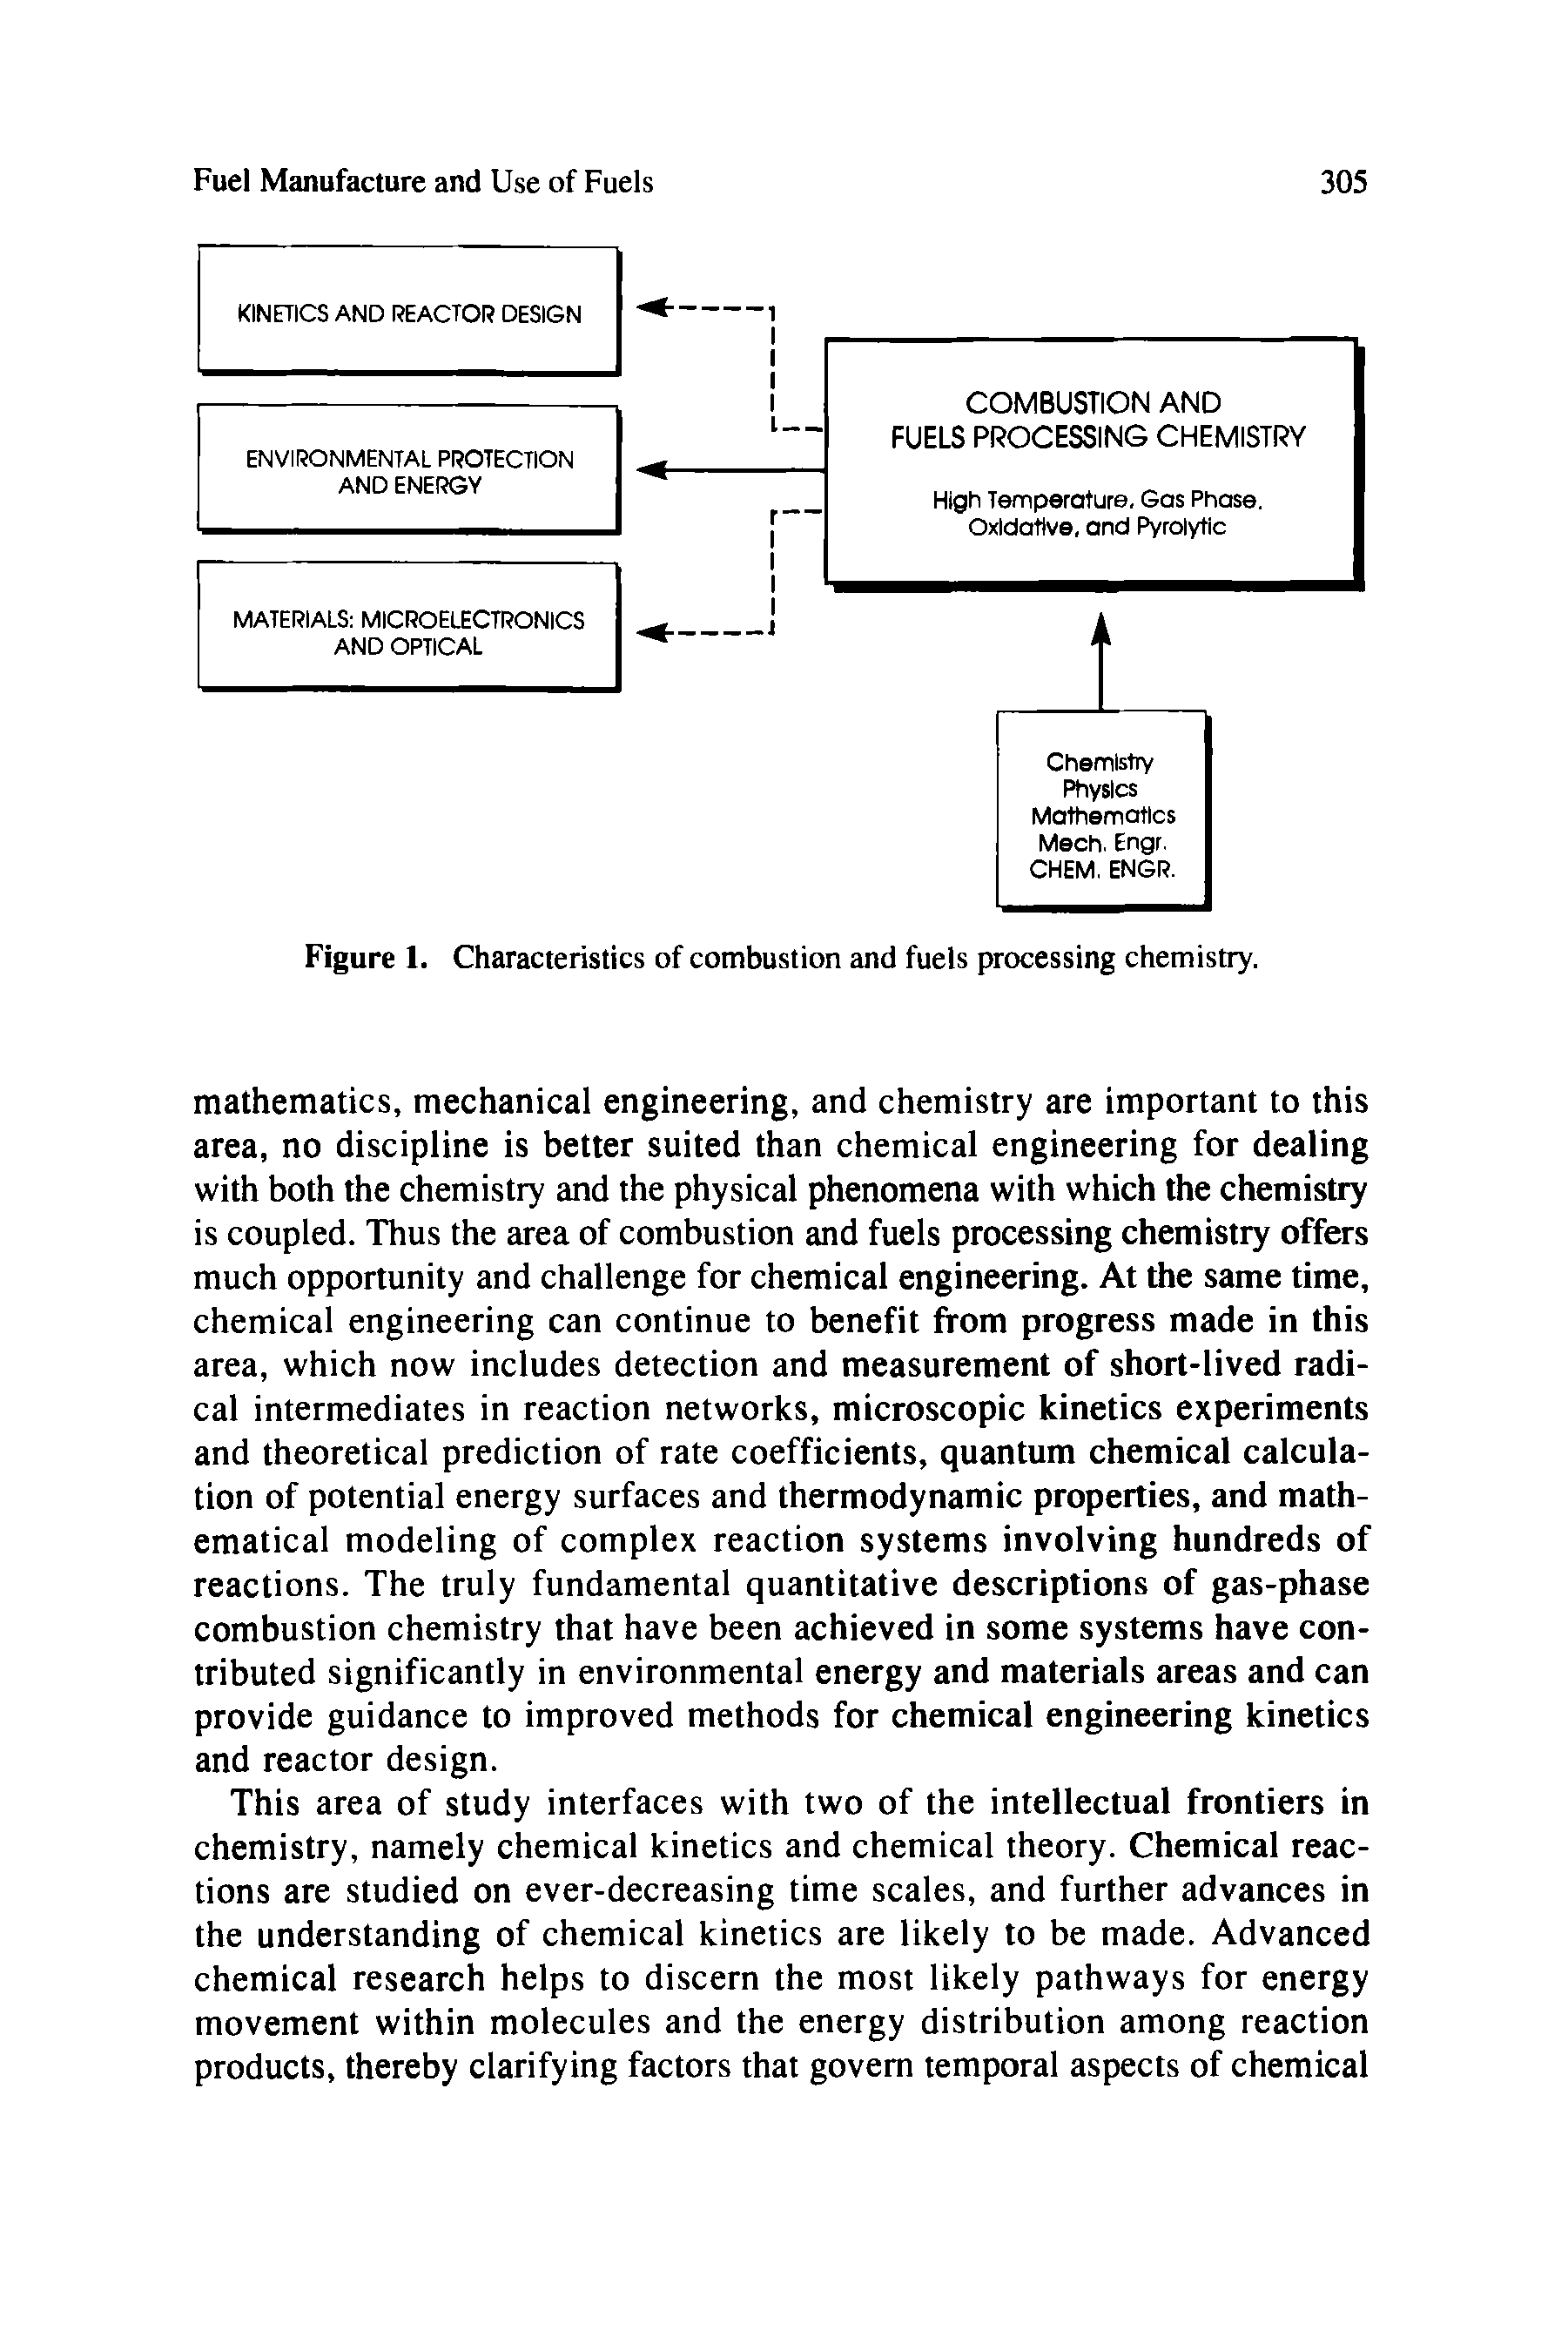 Figure 1. Characteristics of combustion and fuels processing chemistry.